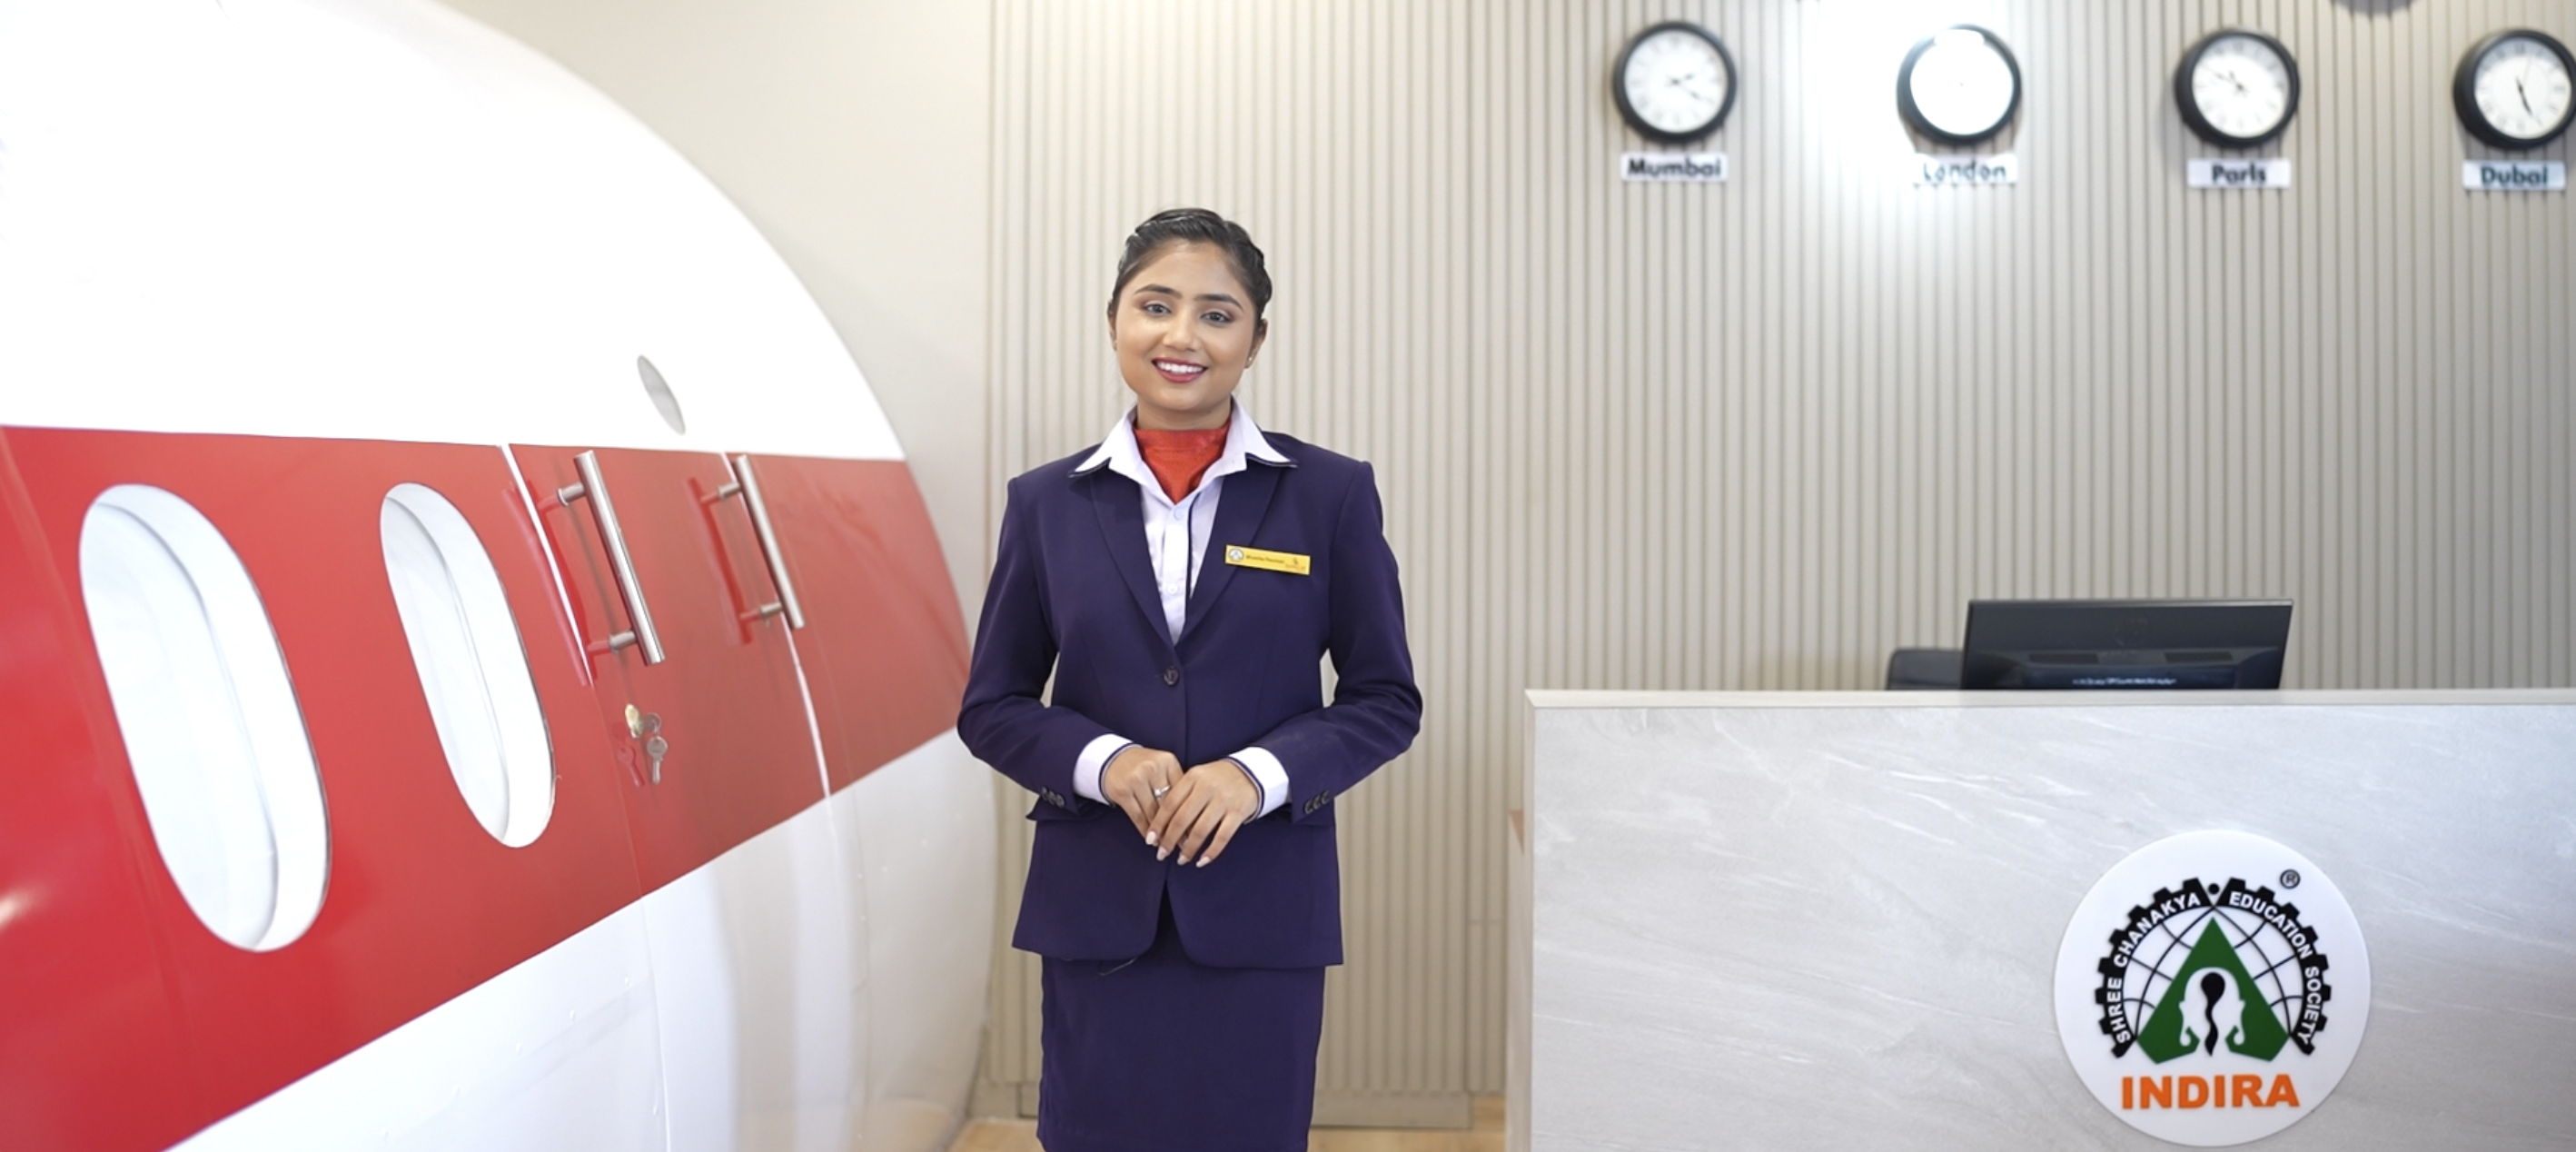 Top Cabin Crew Course Training In Pune